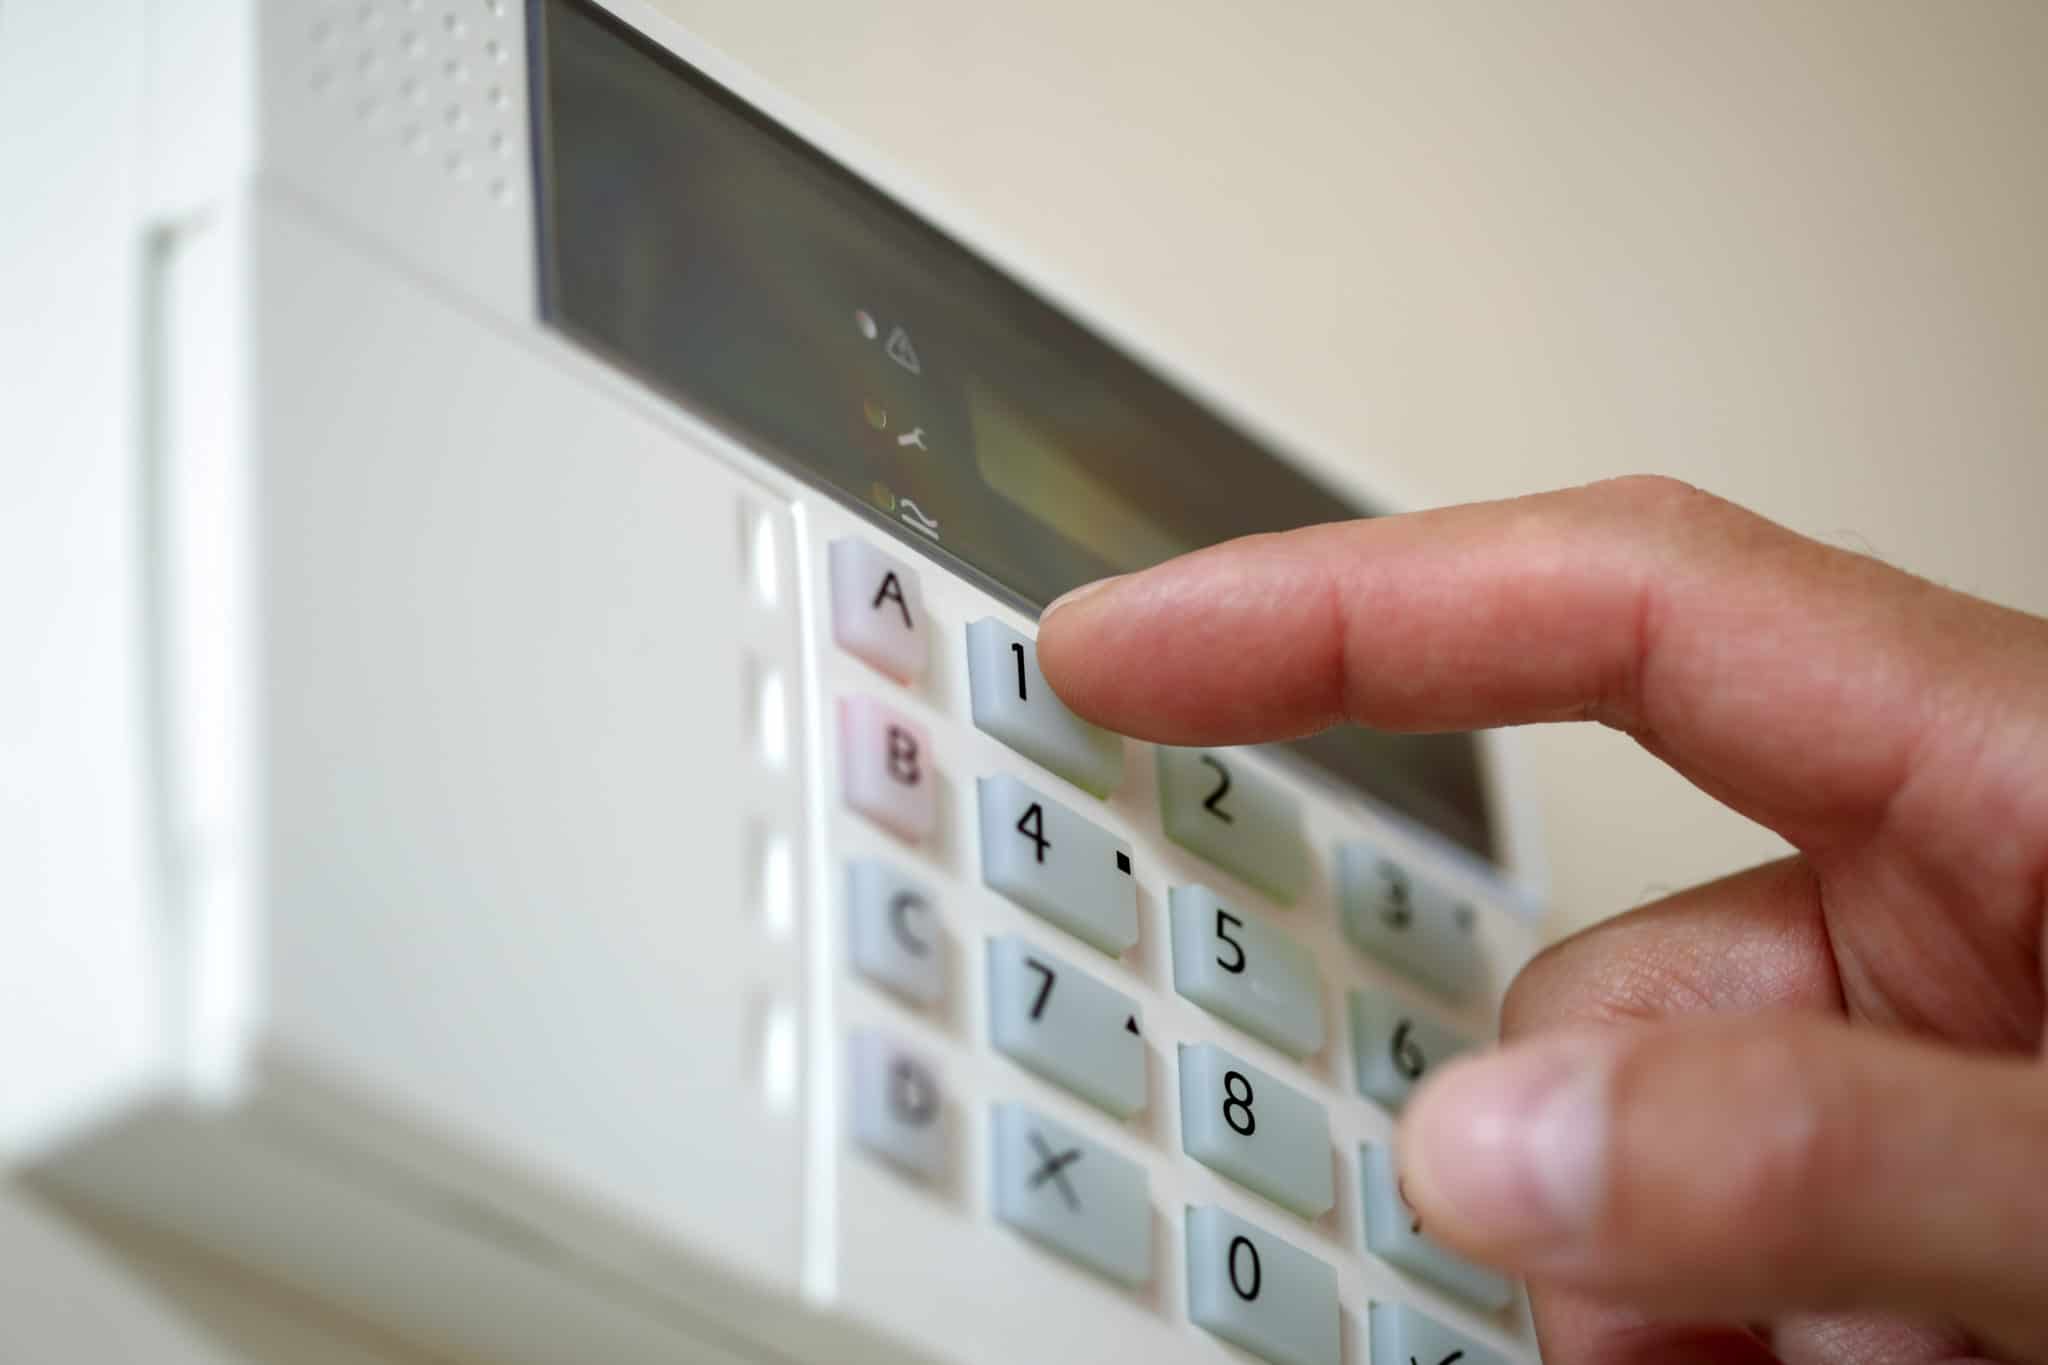 What to Look for in a Home Security System